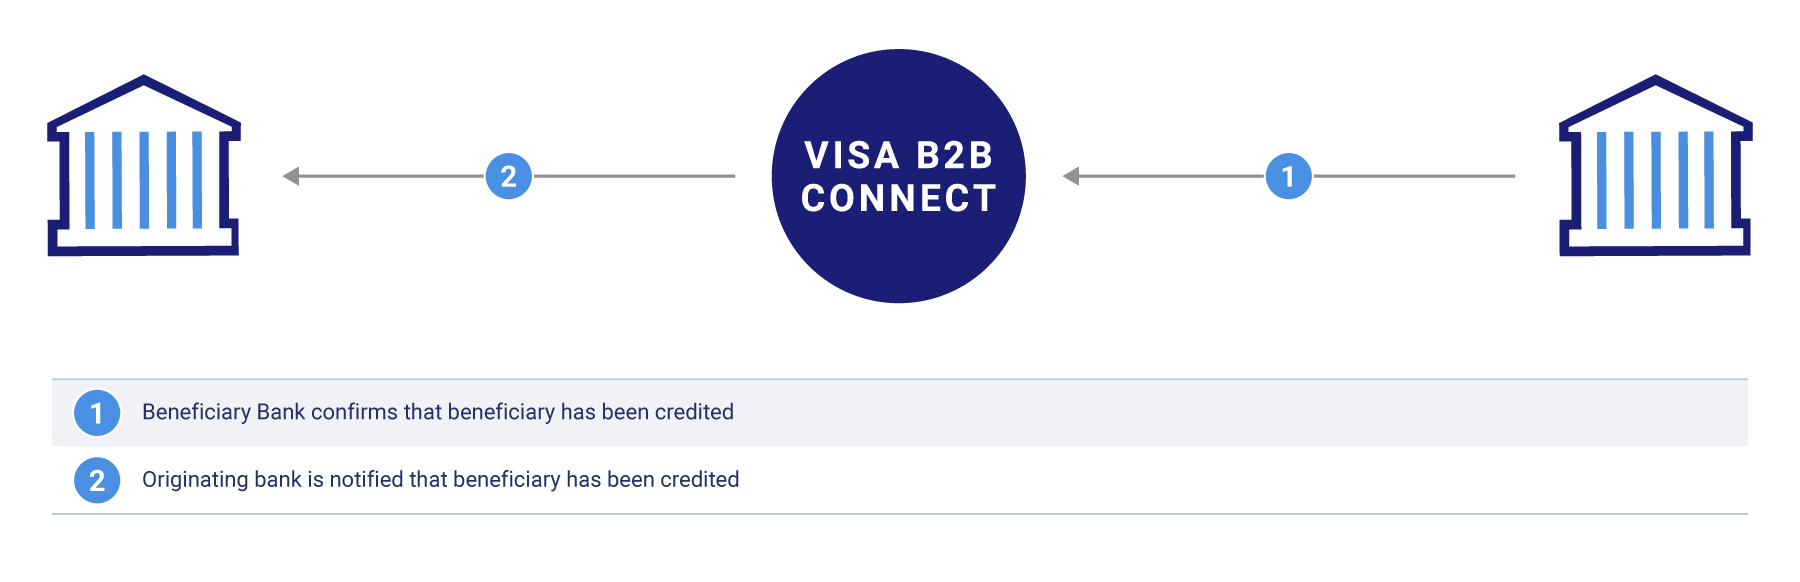 Visa B2B Connect Beneficiary Credit Confirmation Flow